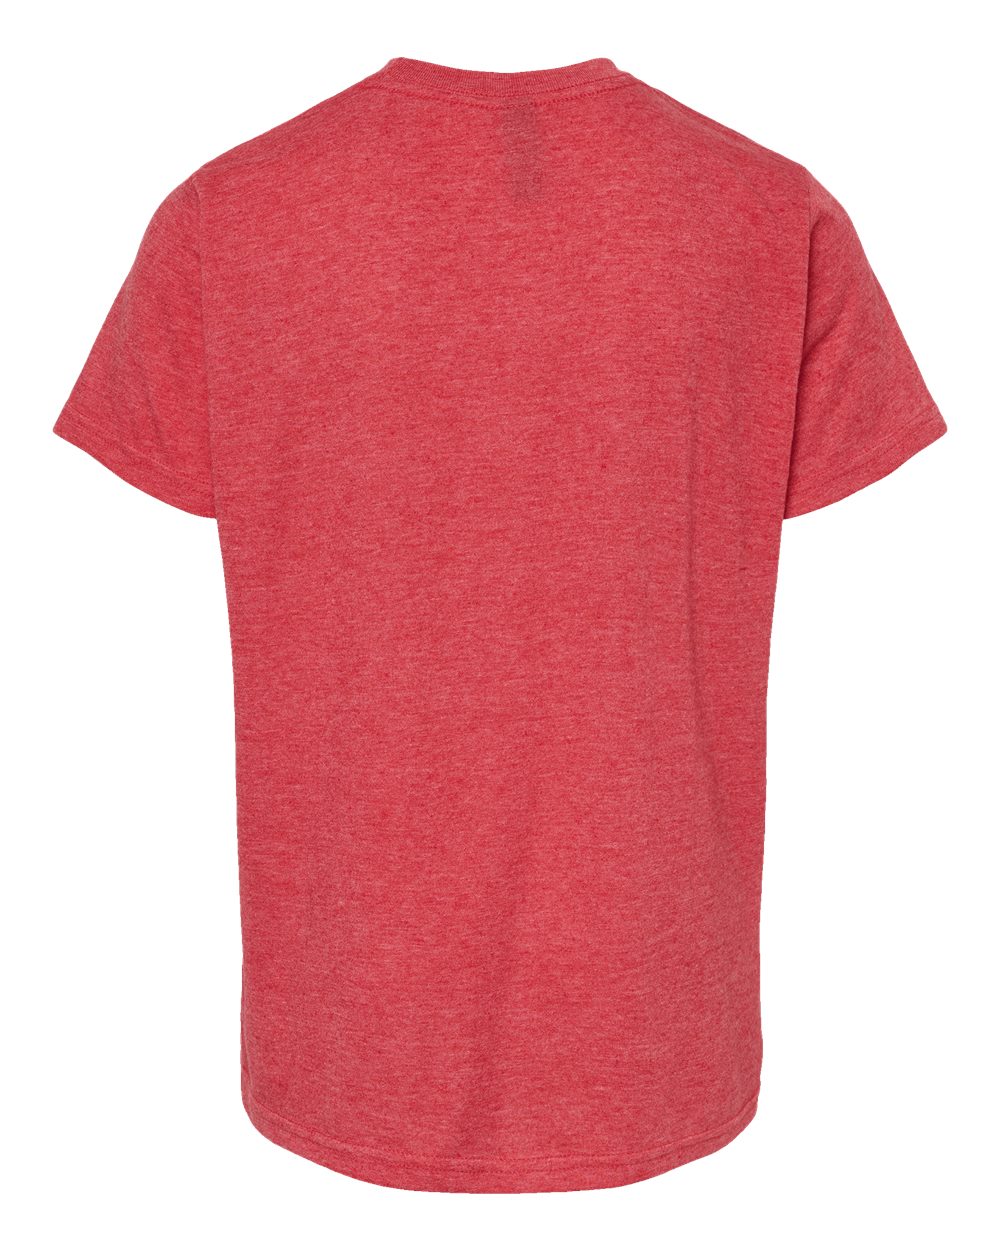 M&O Youth Deluxe Blend T-Shirt 3544 #color_Heather Red